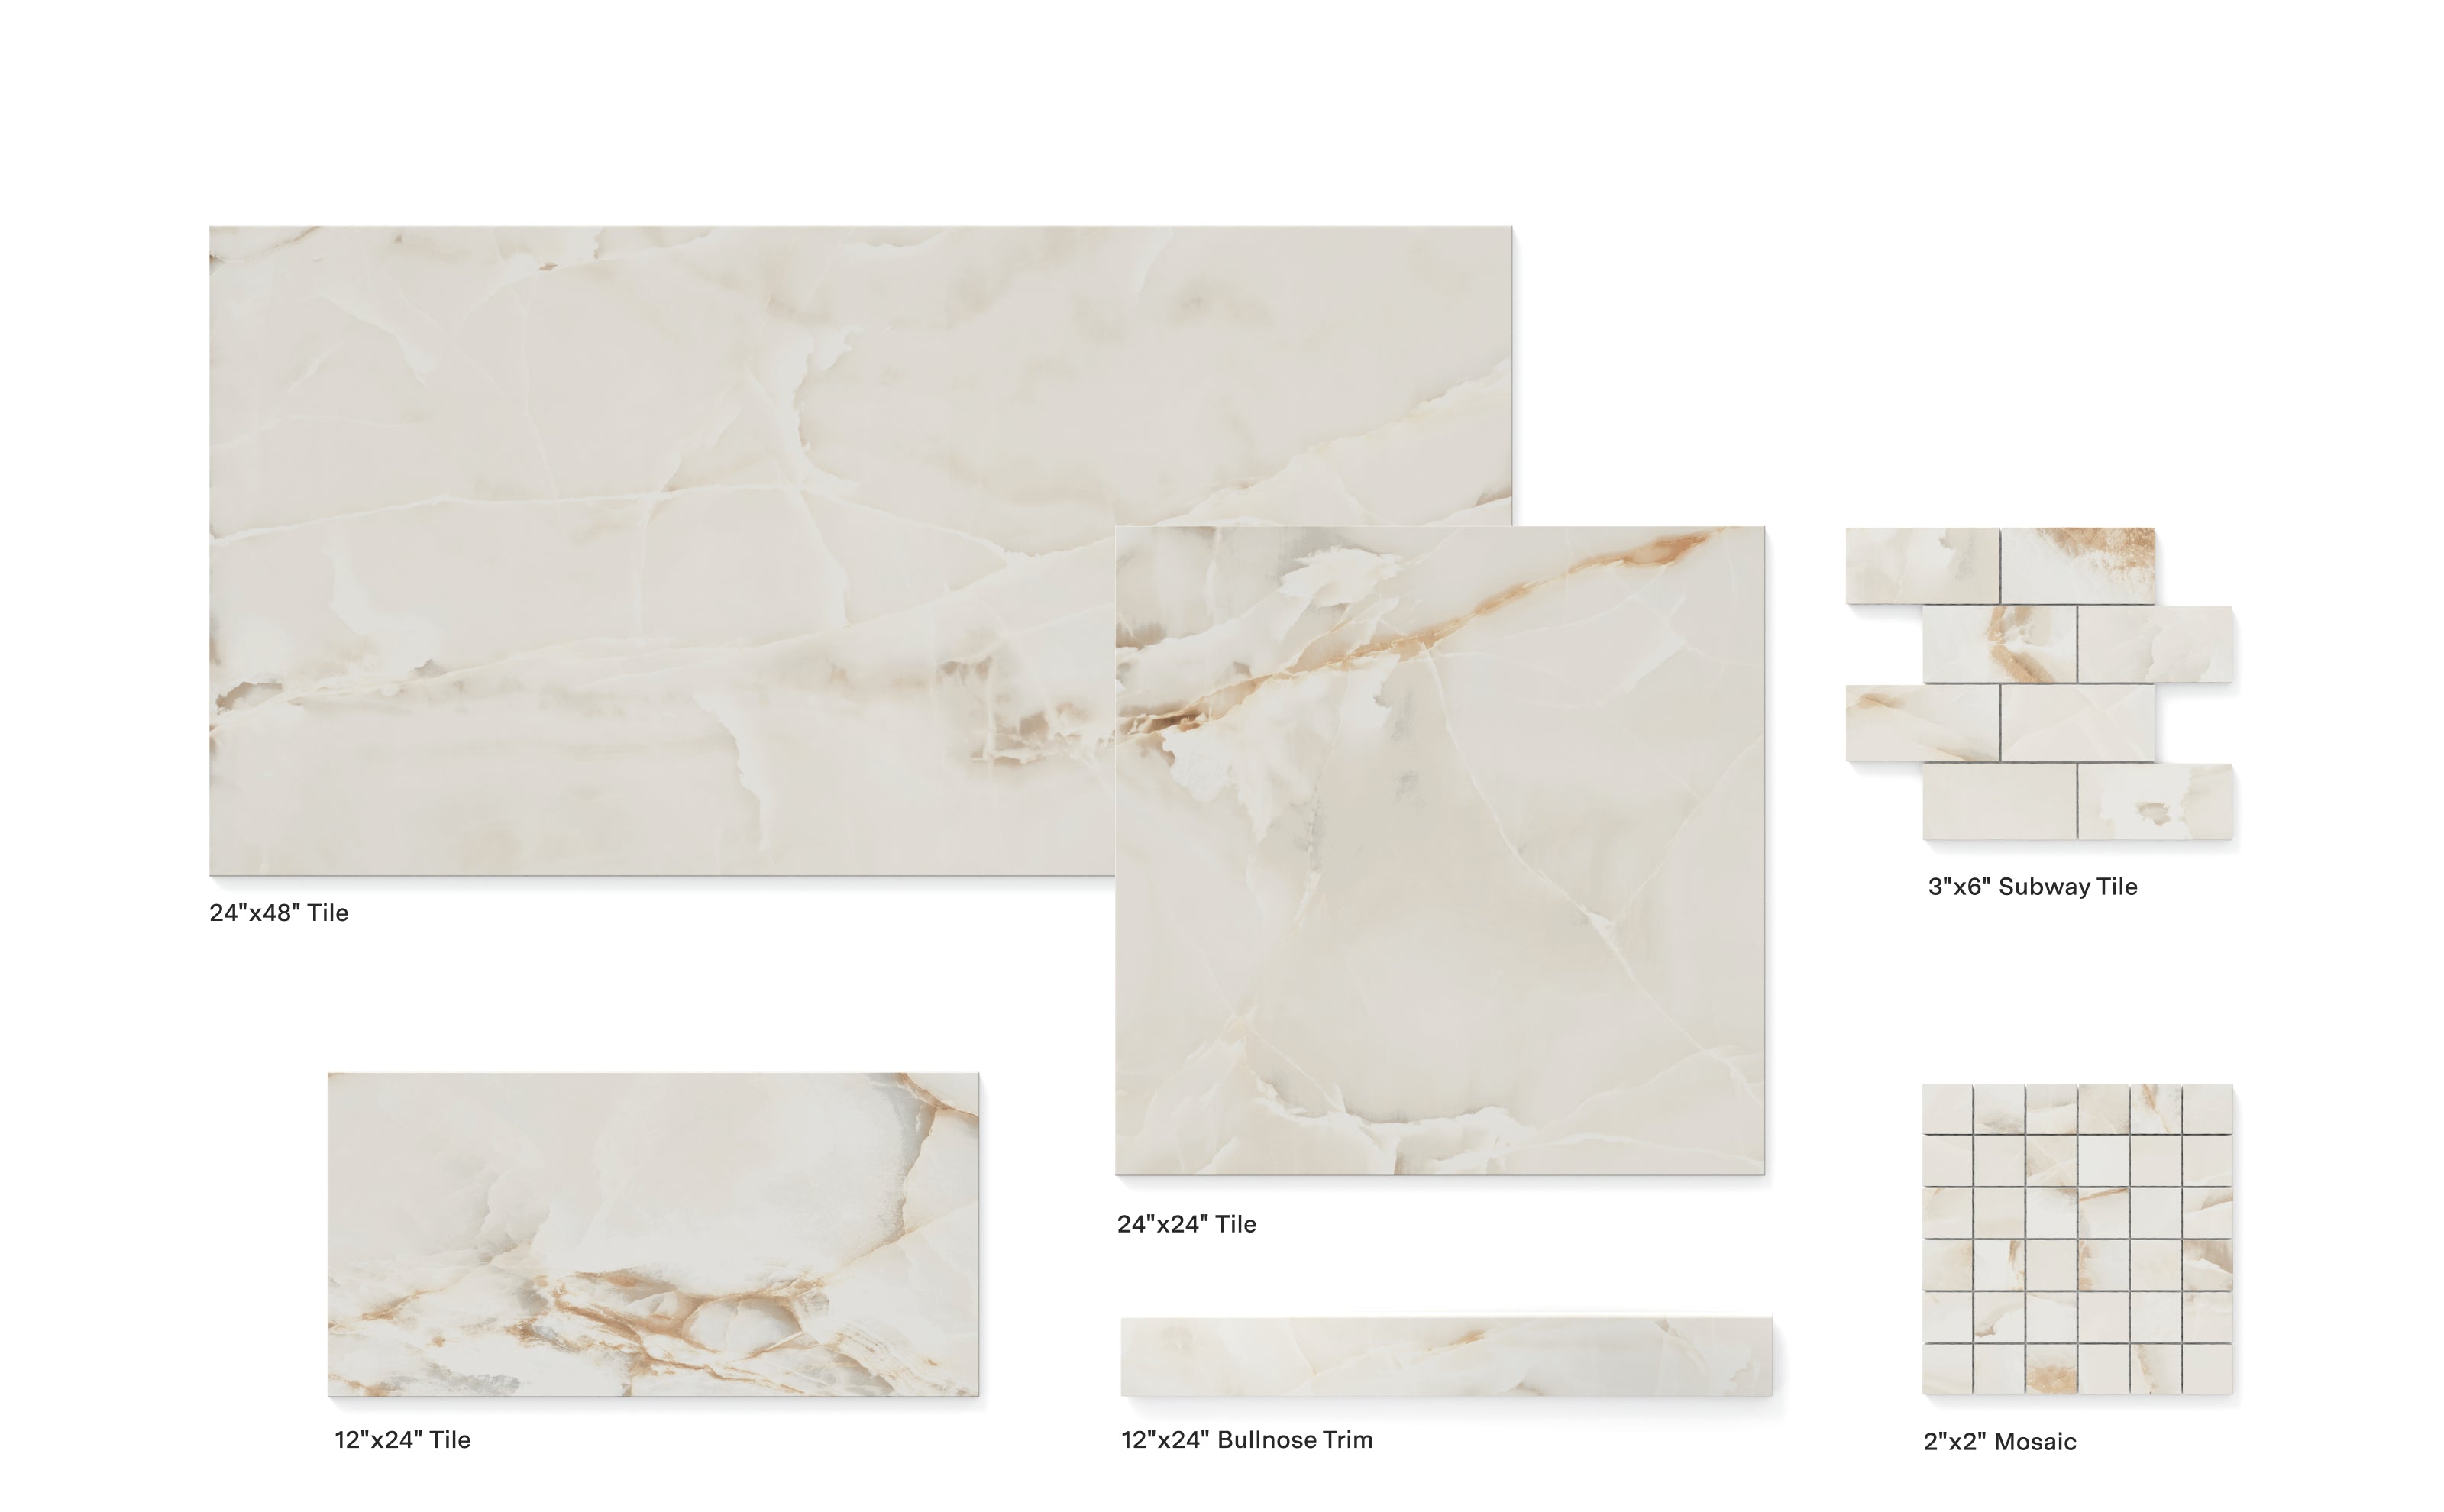 The Astrid collection in full display, offering a variety of sizes including large format 24x48 and 24x24 tiles, 12x24 tiles, 3x6 subway tiles, 3x24 bullnose trims, and detailed 2x2 square mosaics.